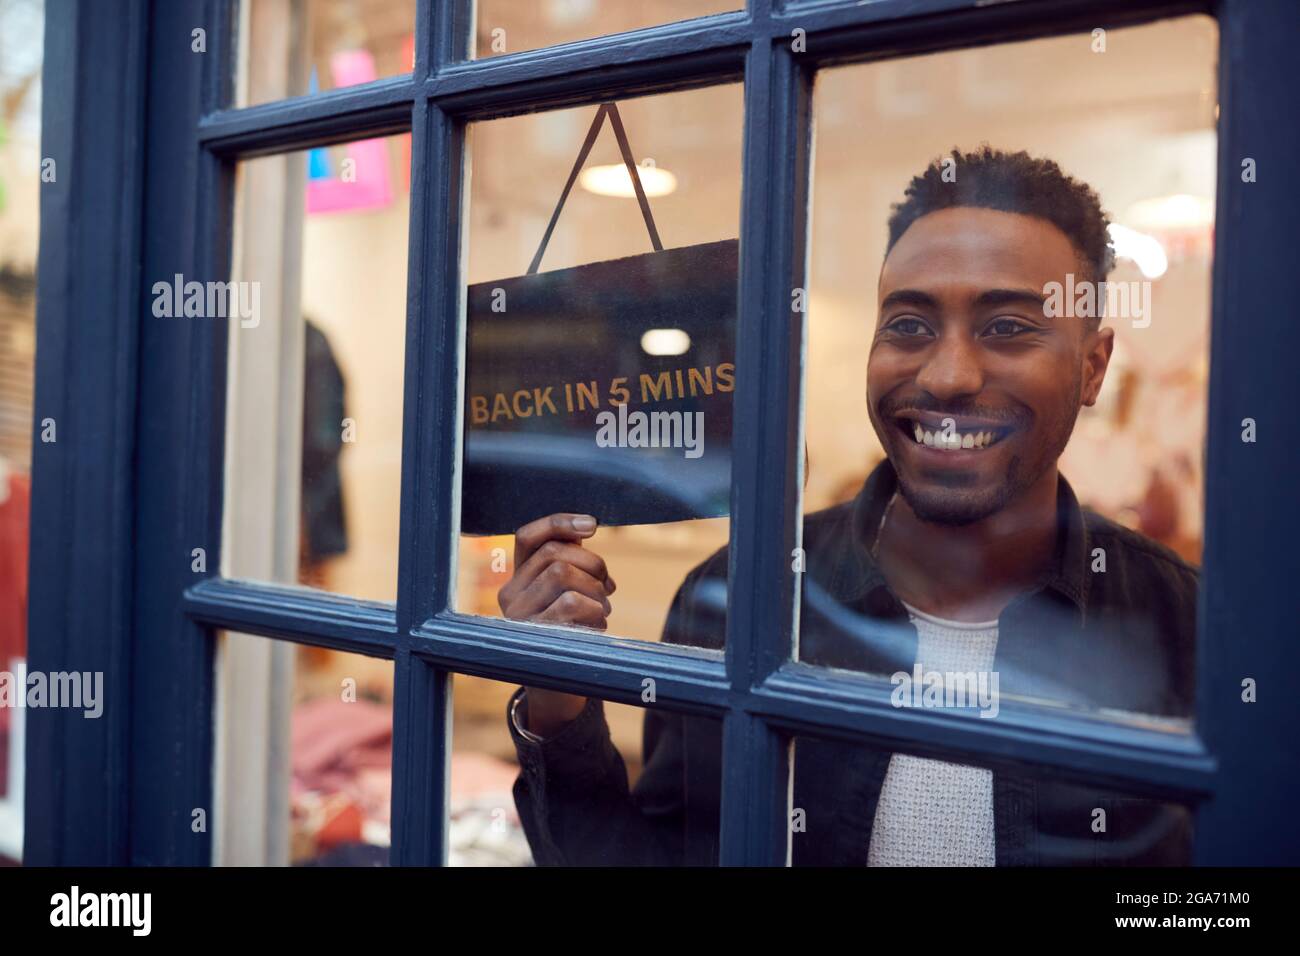 Smiling Small Business Owner Turning Around Back In 5 Minutes Sign On Shop Or Store Door Stock Photo